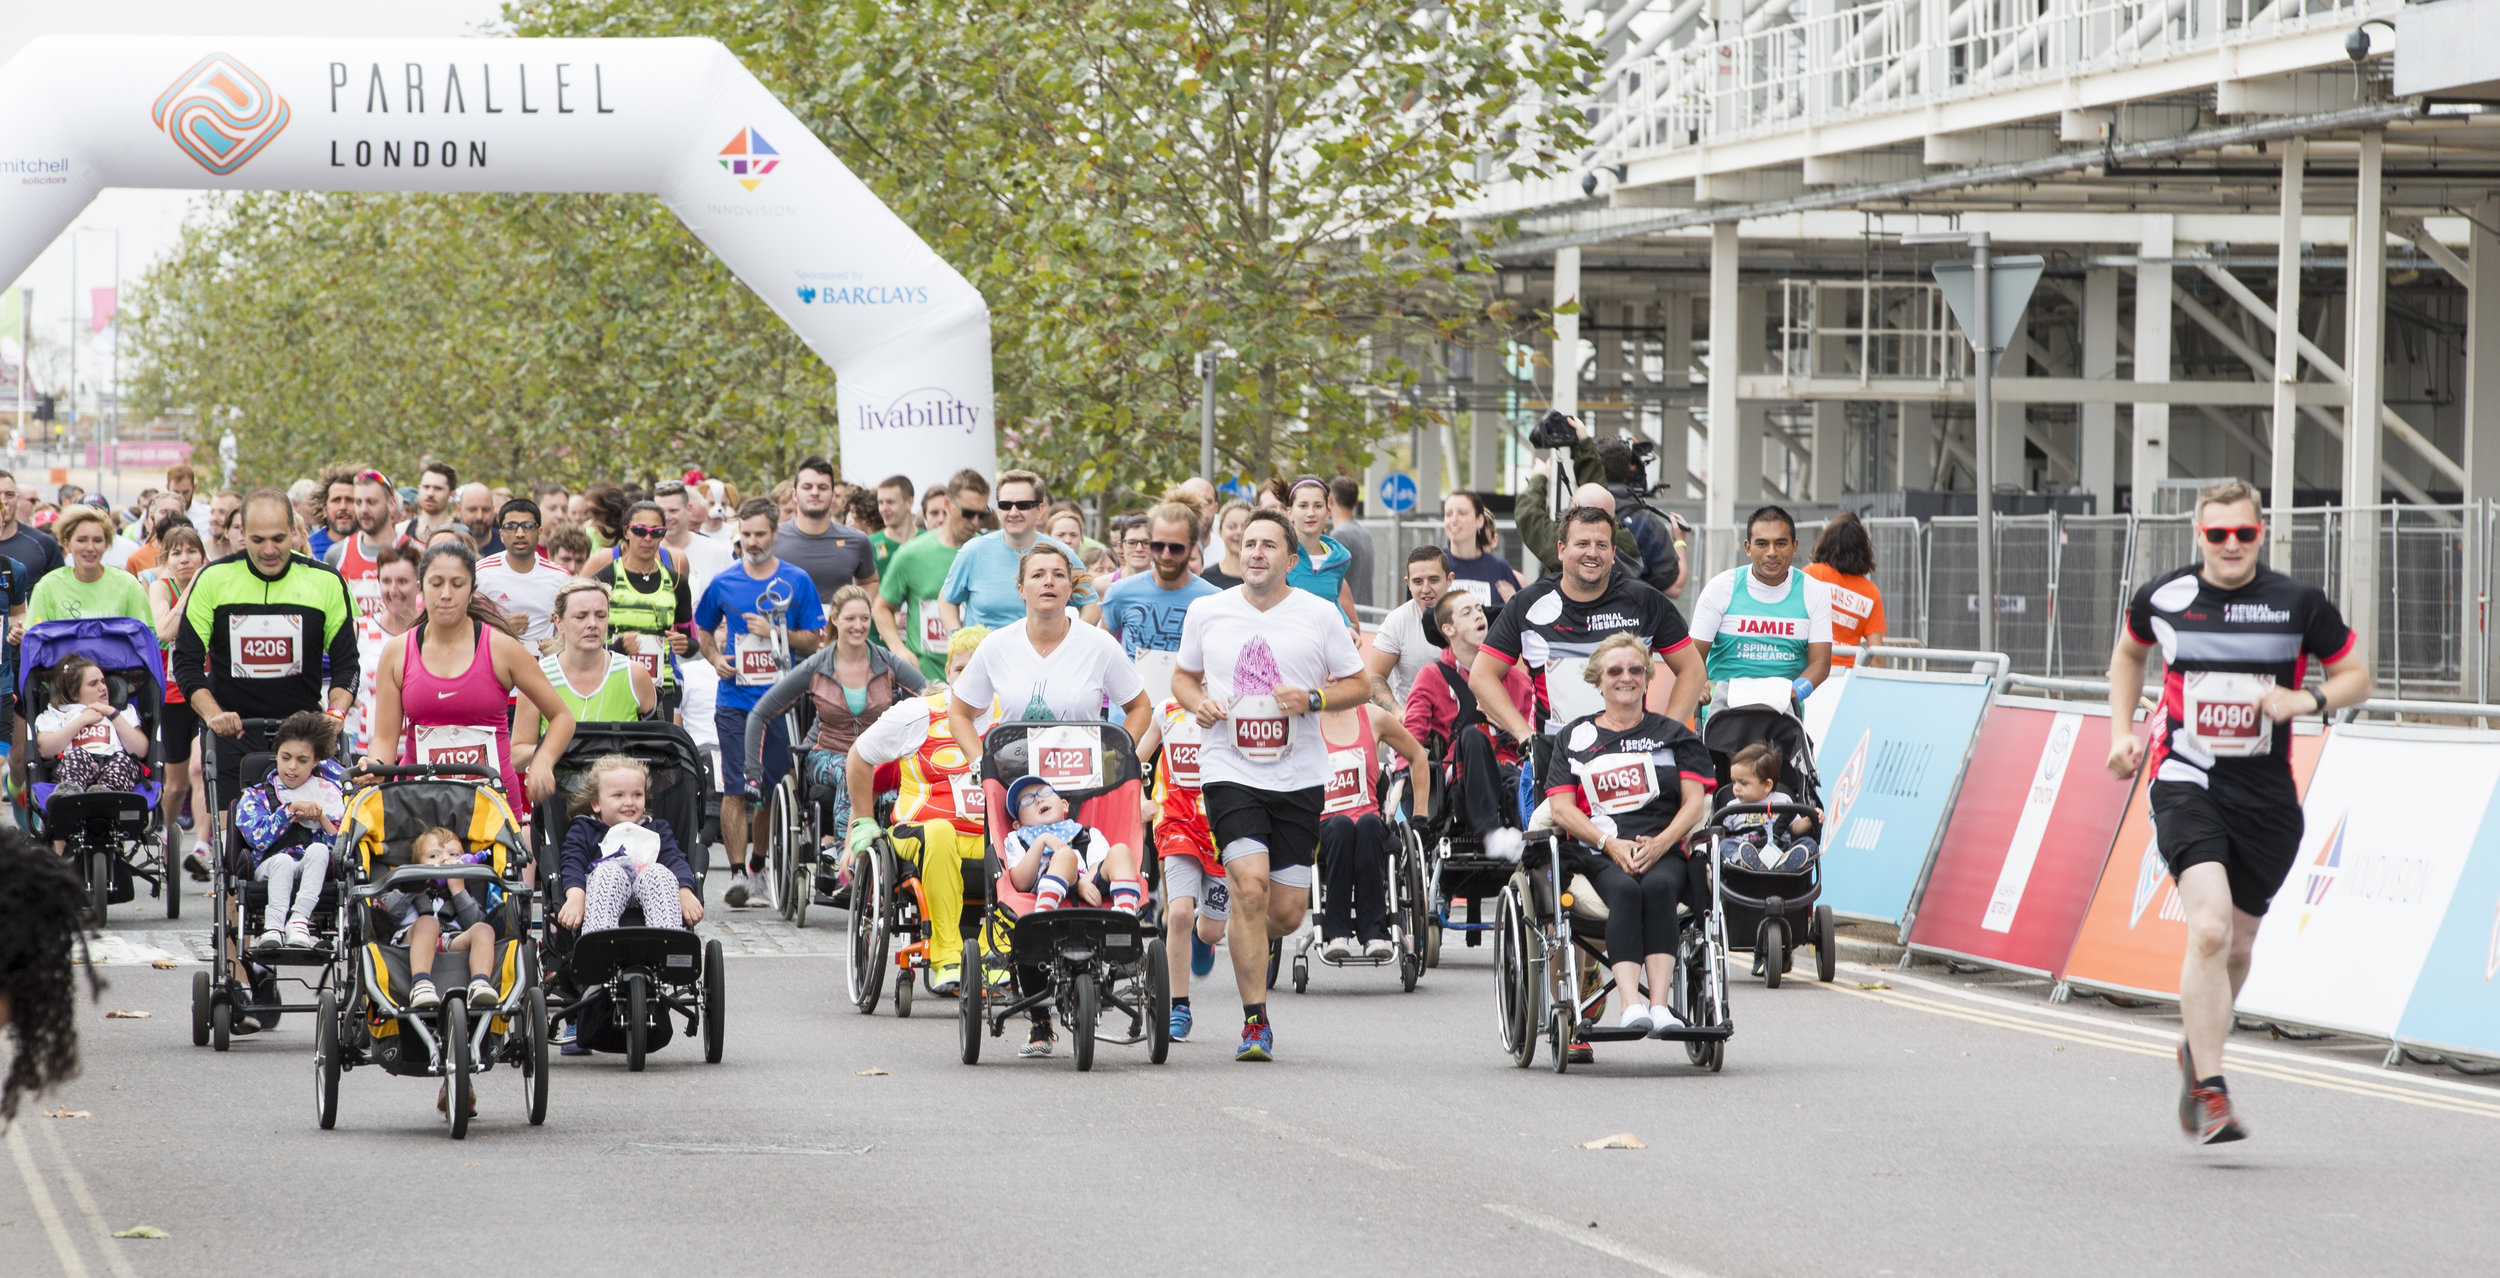 Parallel London heads to London's Queen Elizabeth Olympic Park on 3 September  3